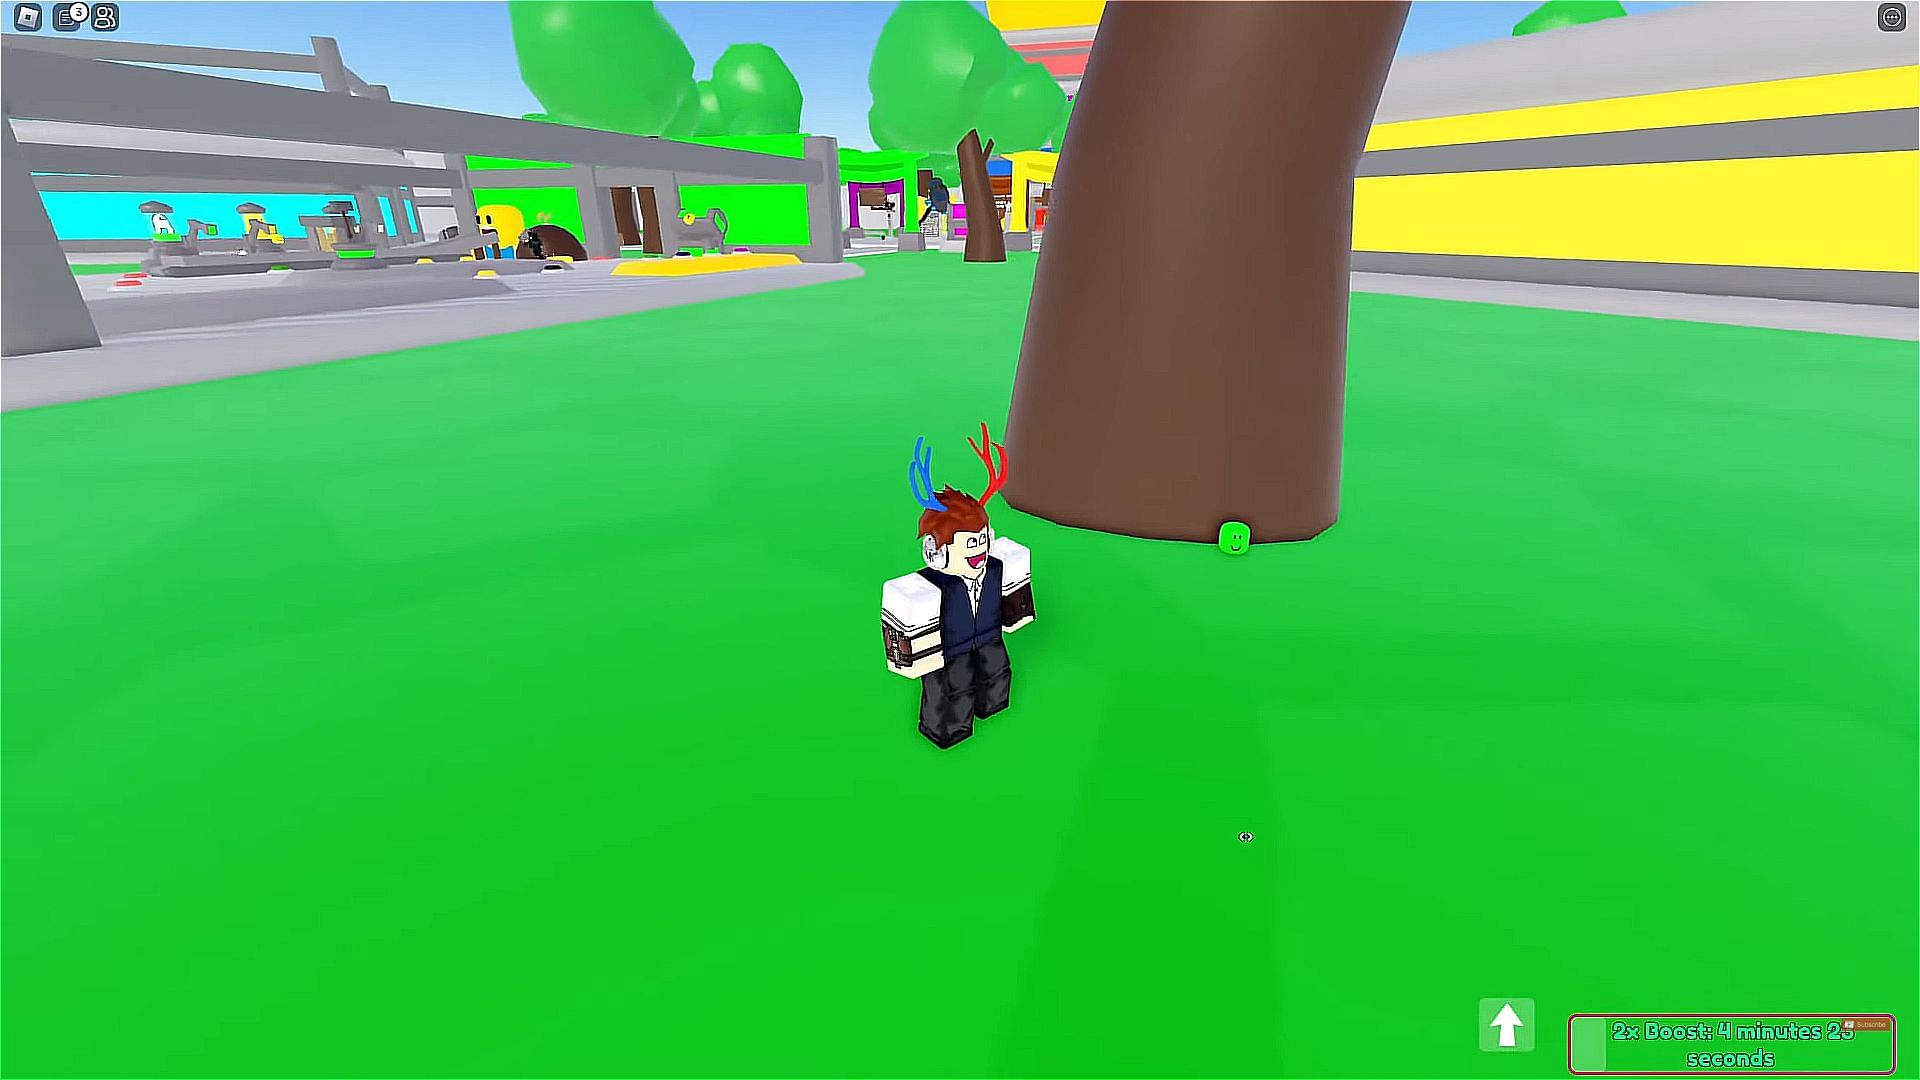 Roblox Meme Tycoon: How to get the Rainbow Noob and Noob Badges?